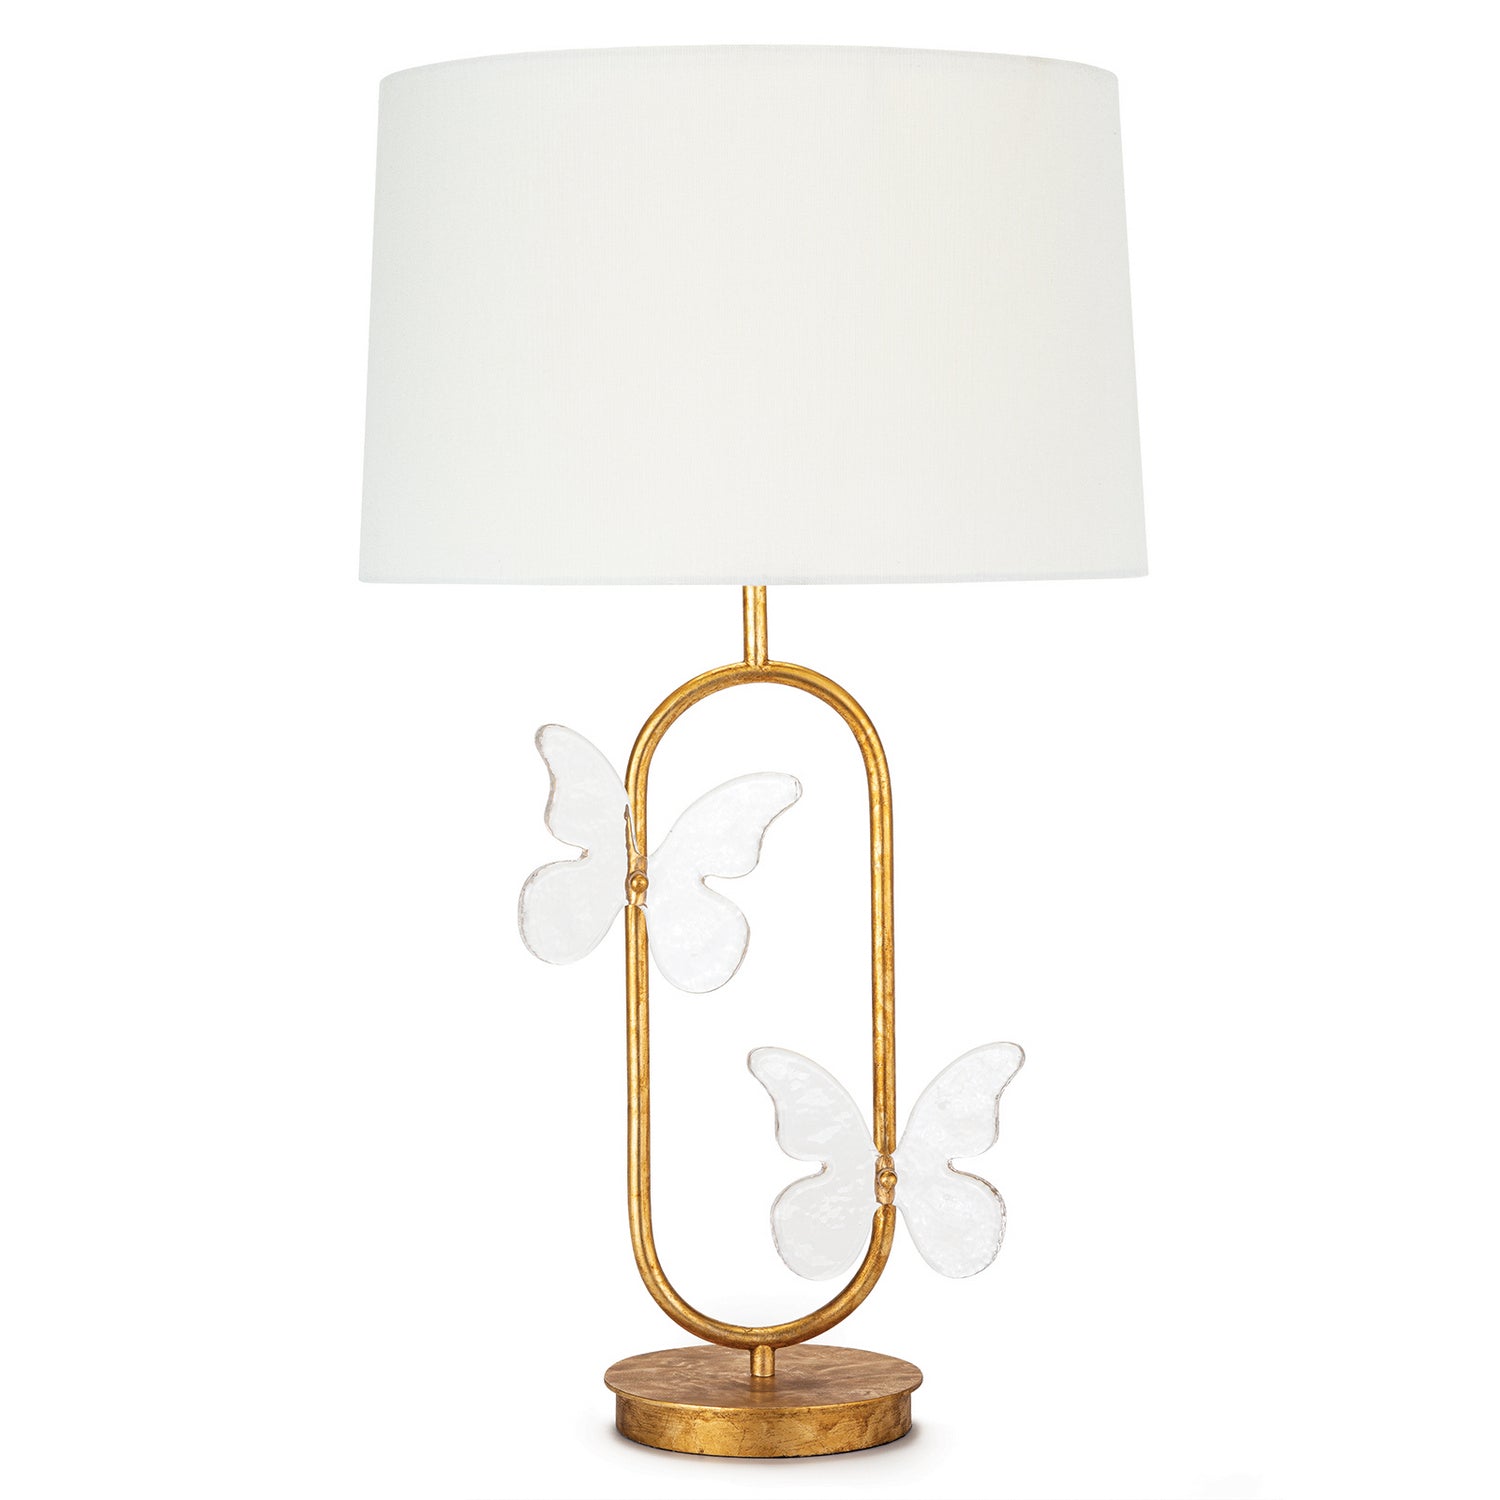 Regina Andrew - 13-1490 - One Light Table Lamp - Monarch - Gold Leaf